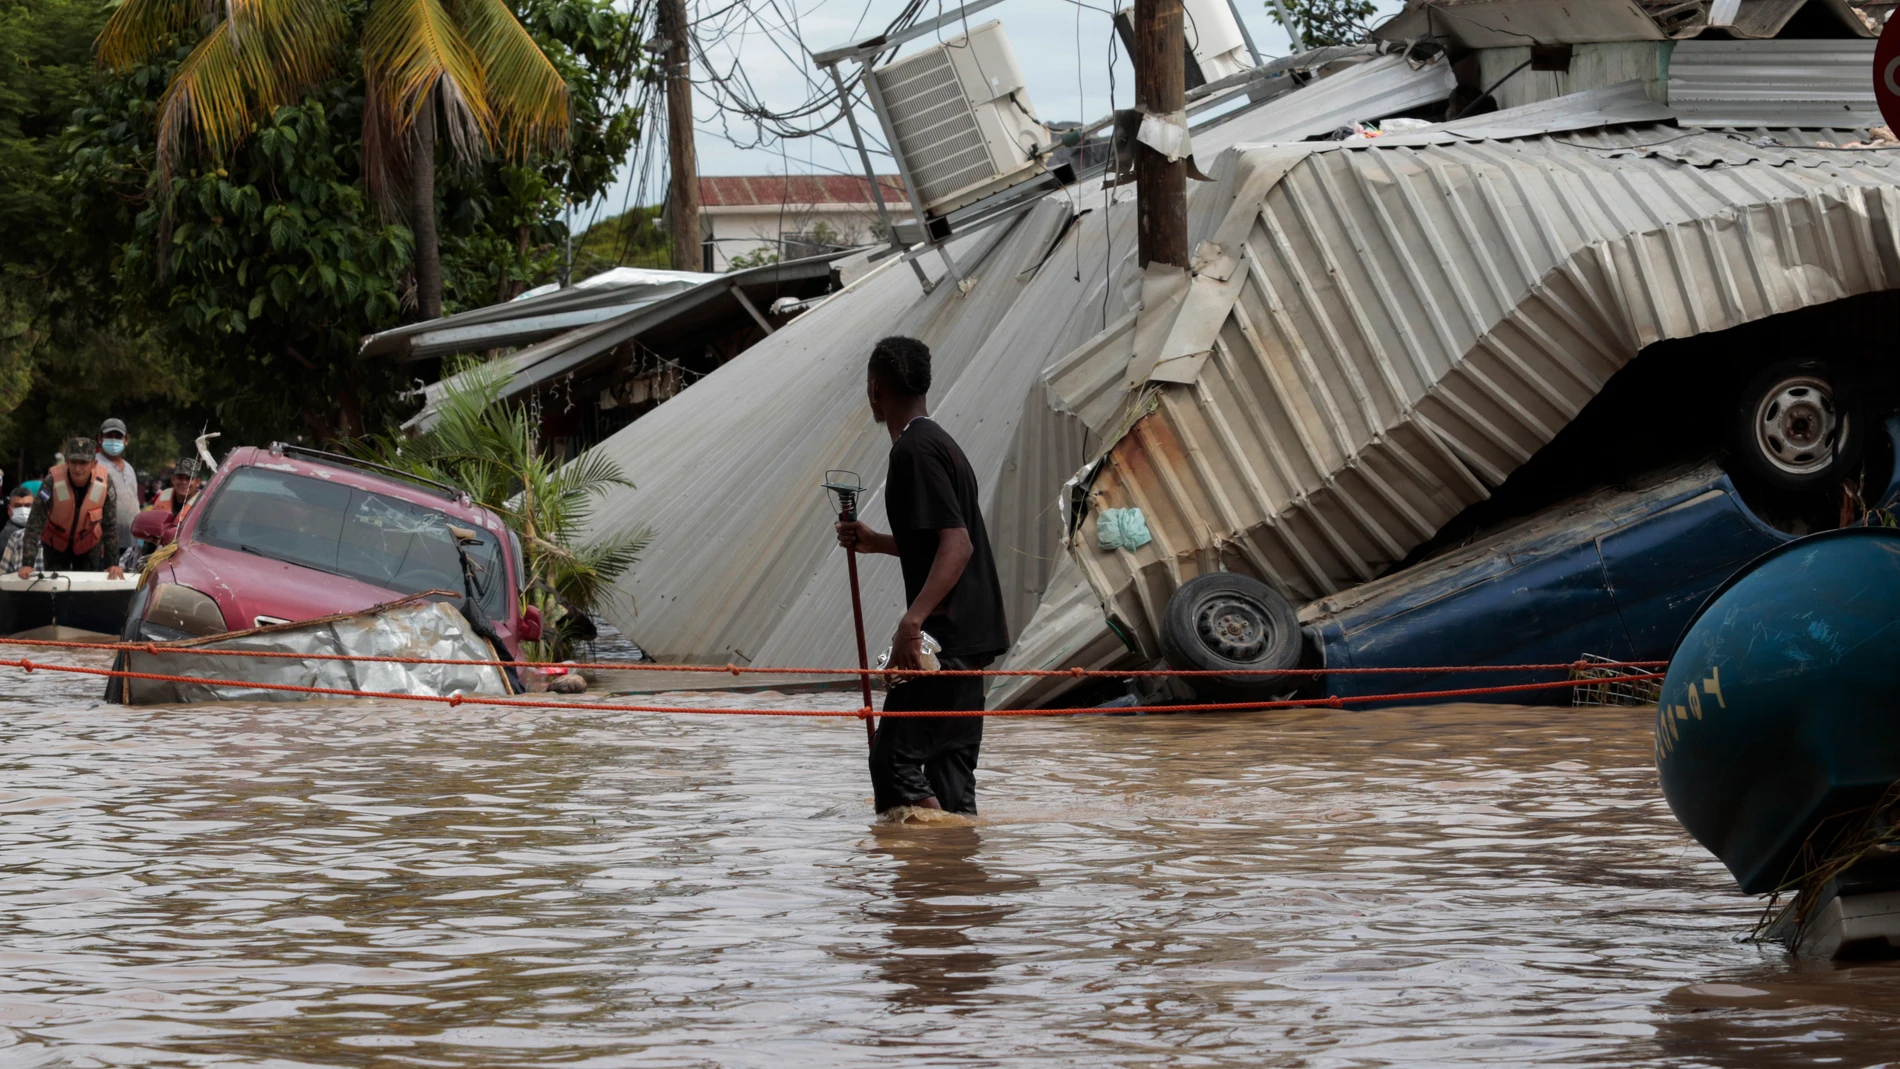 FILE - In this Nov. 6, 2020, file photo, a resident walking through a flooded street looks back at storm damage caused by Hurricane Eta in Planeta, Honduras. Environmental campaigners called Wednesday for fossil fuel producers to contribute to a new fund intended to help poor countries cope with climate disasters. (AP Photo/Delmer Martinez, File)